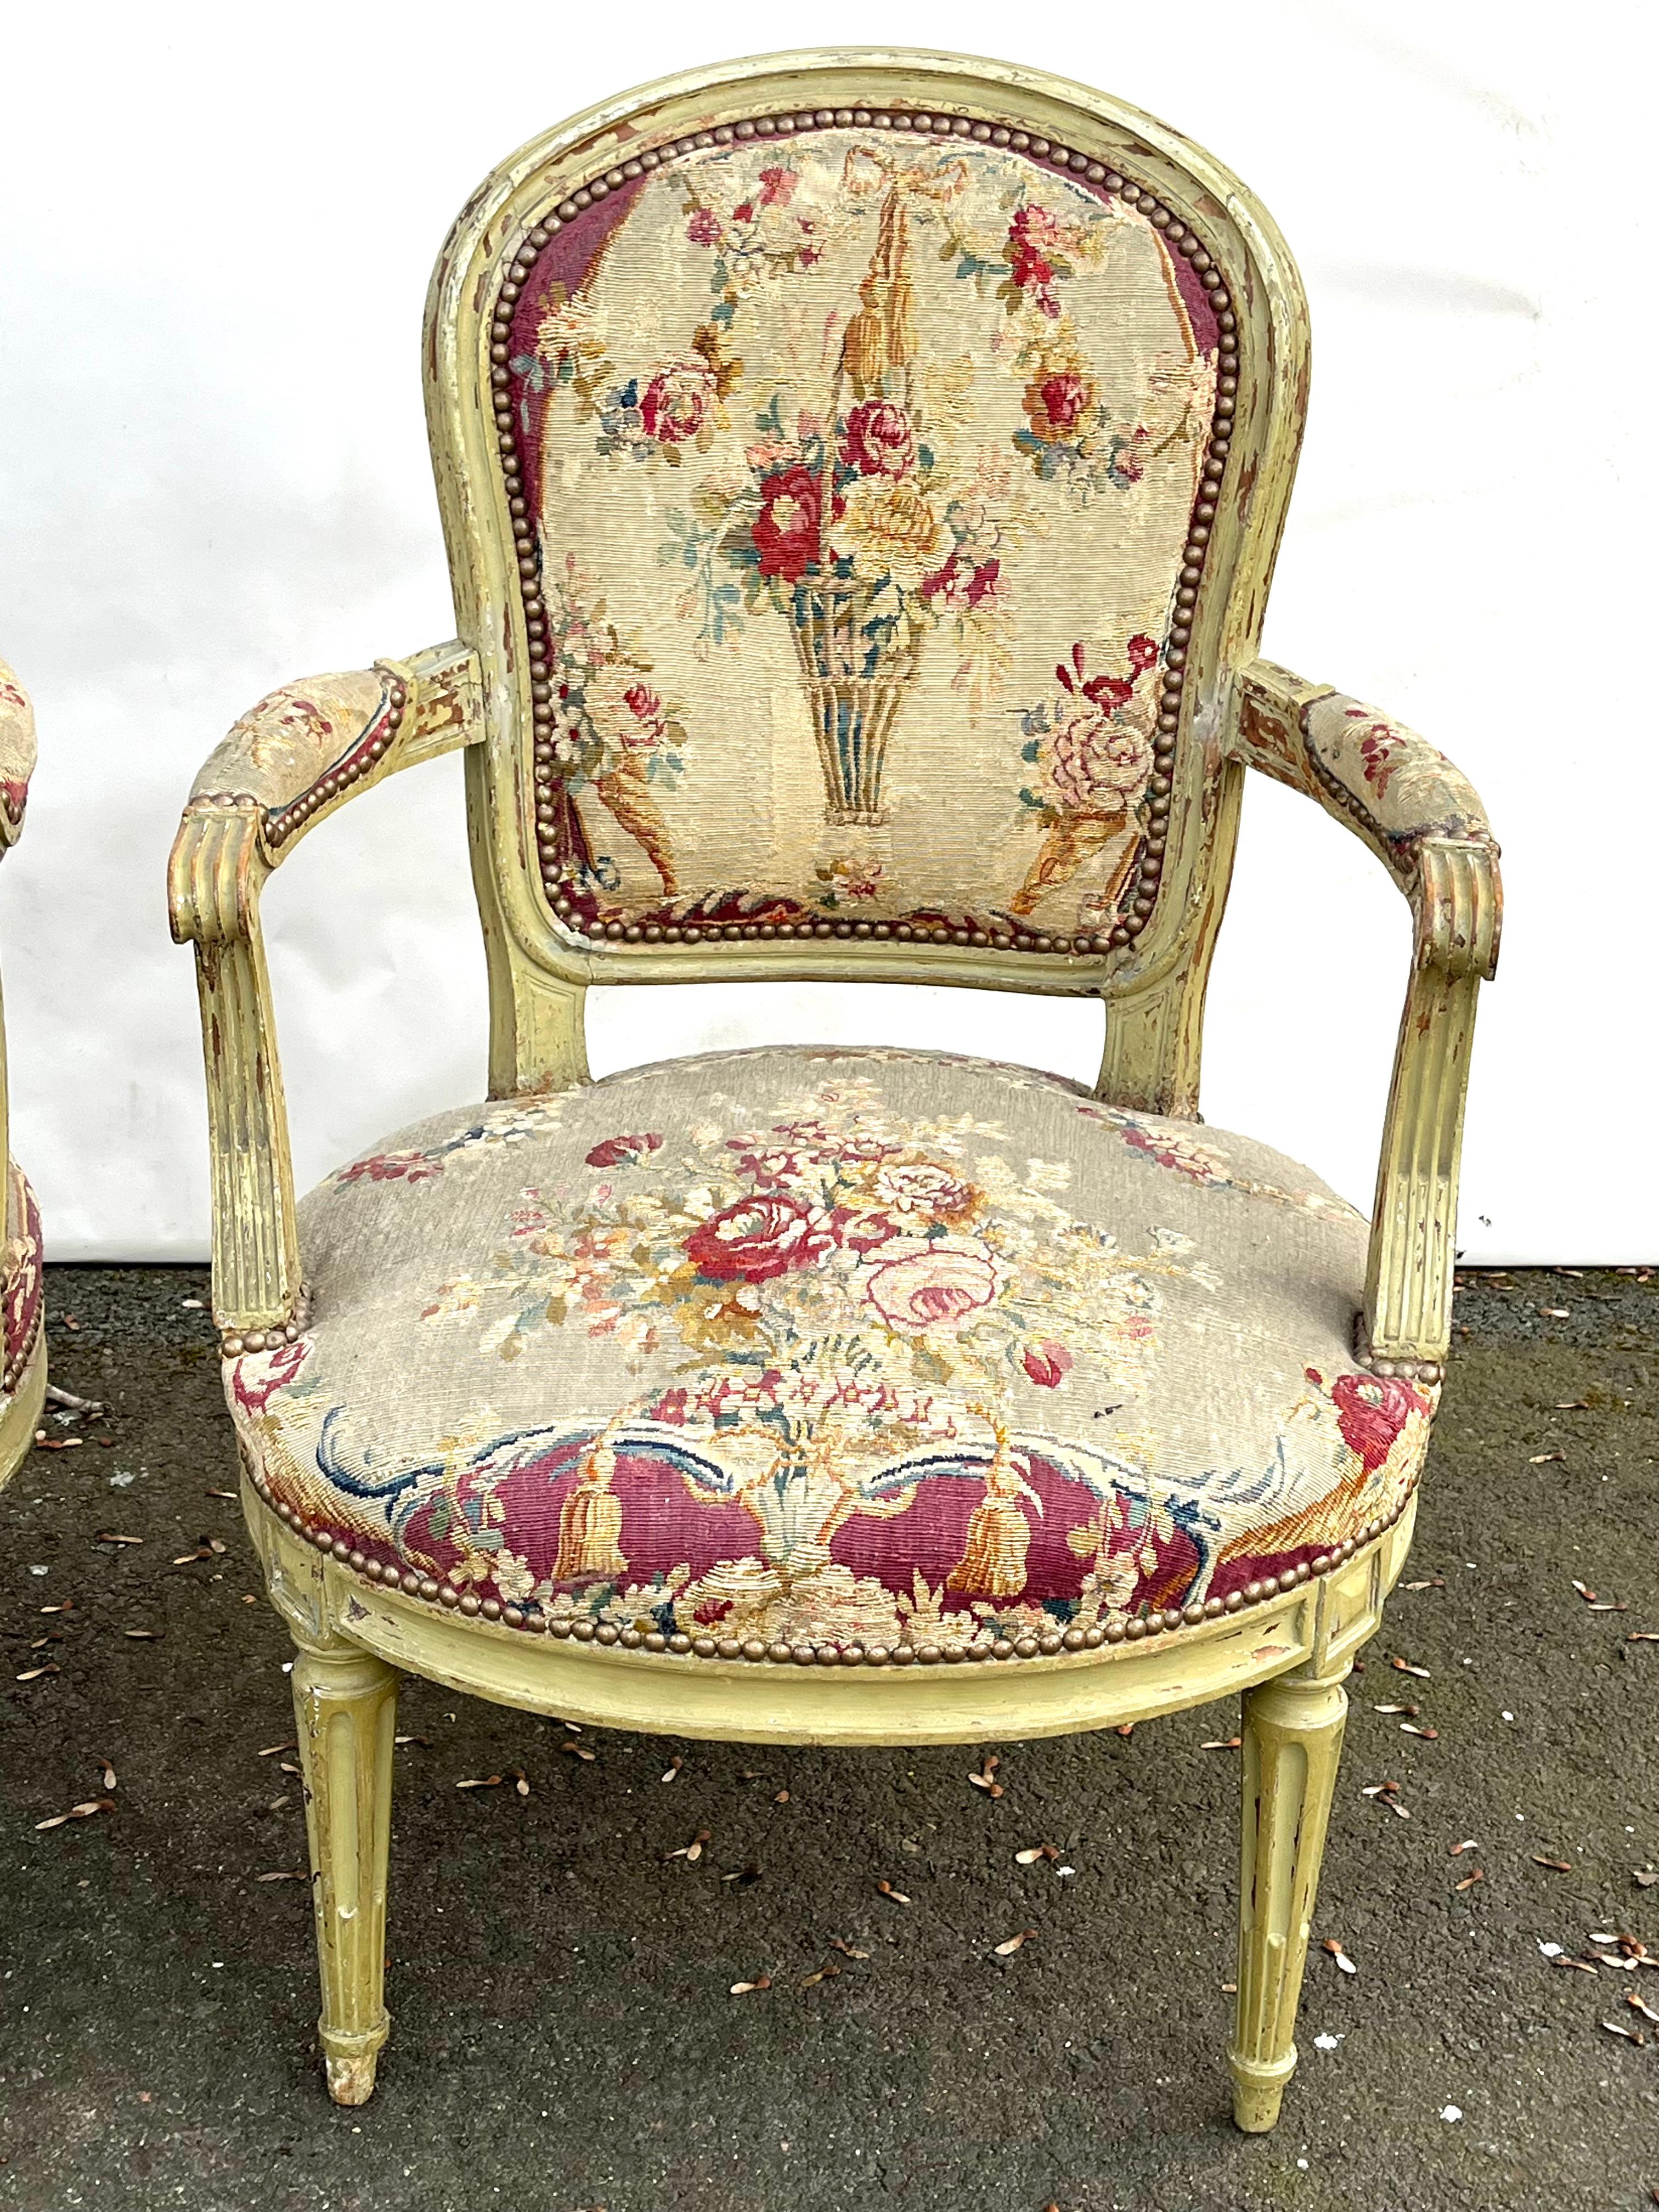 Hand-Carved Set of 4 Louis XVI Period Fauteuils Stamped ”F. Lapierre a Lyon” For Sale